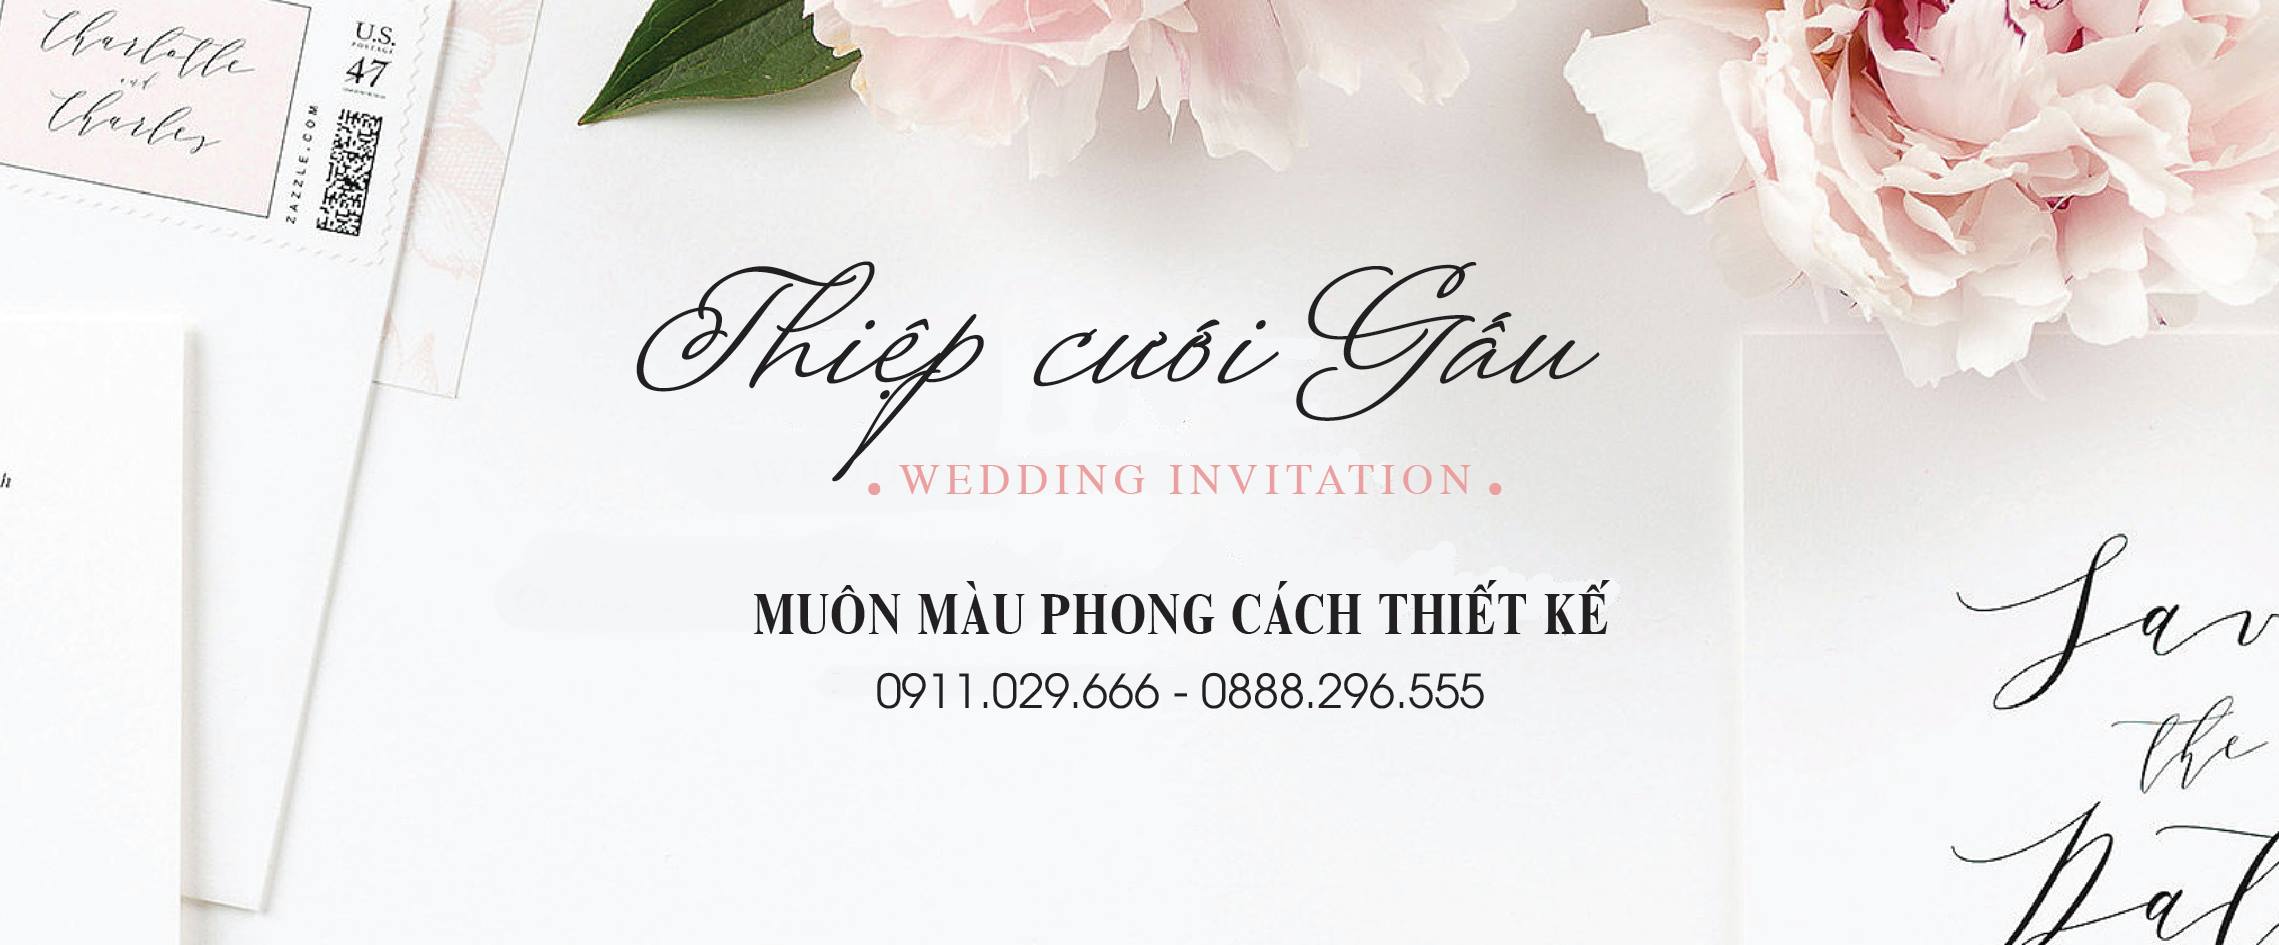 thiep-cuoi-sang trong-1